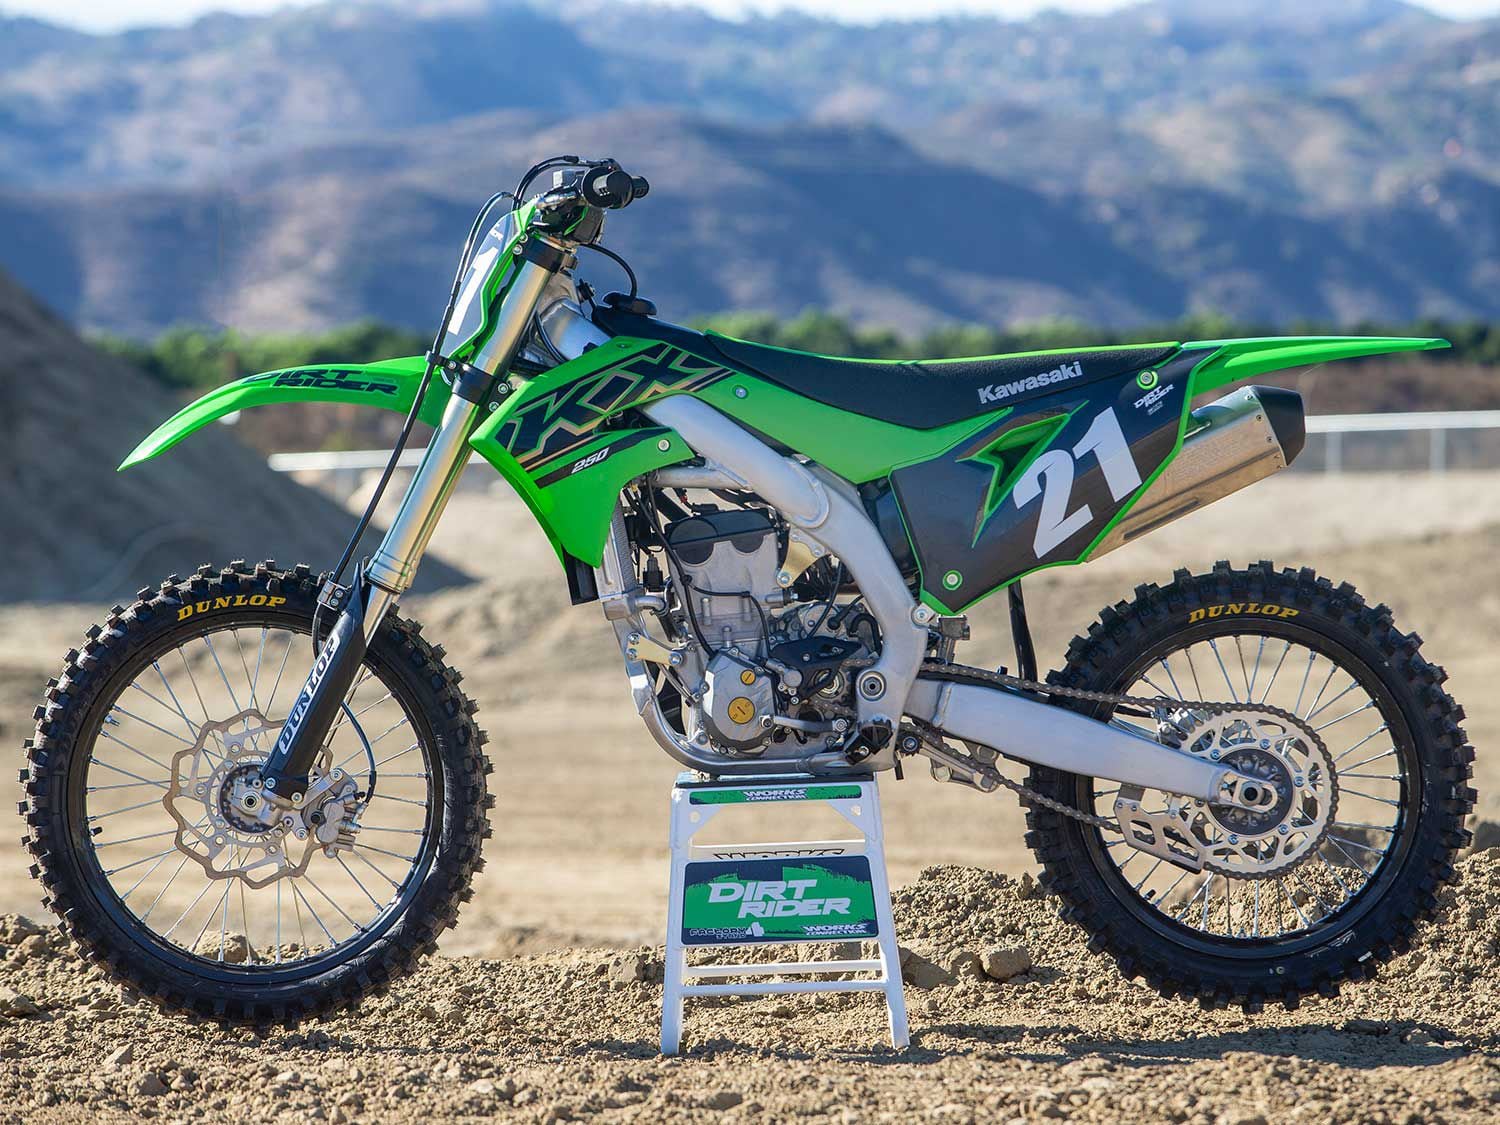 Kawasaki added electric start to the KX250 for 2021. While that feature is certainly a welcomed addition, it is a major contributing factor to the bike gaining 5 pounds over the prior year model as it now weighs 238 pounds, making it the heaviest motorcycle in this comparison test.